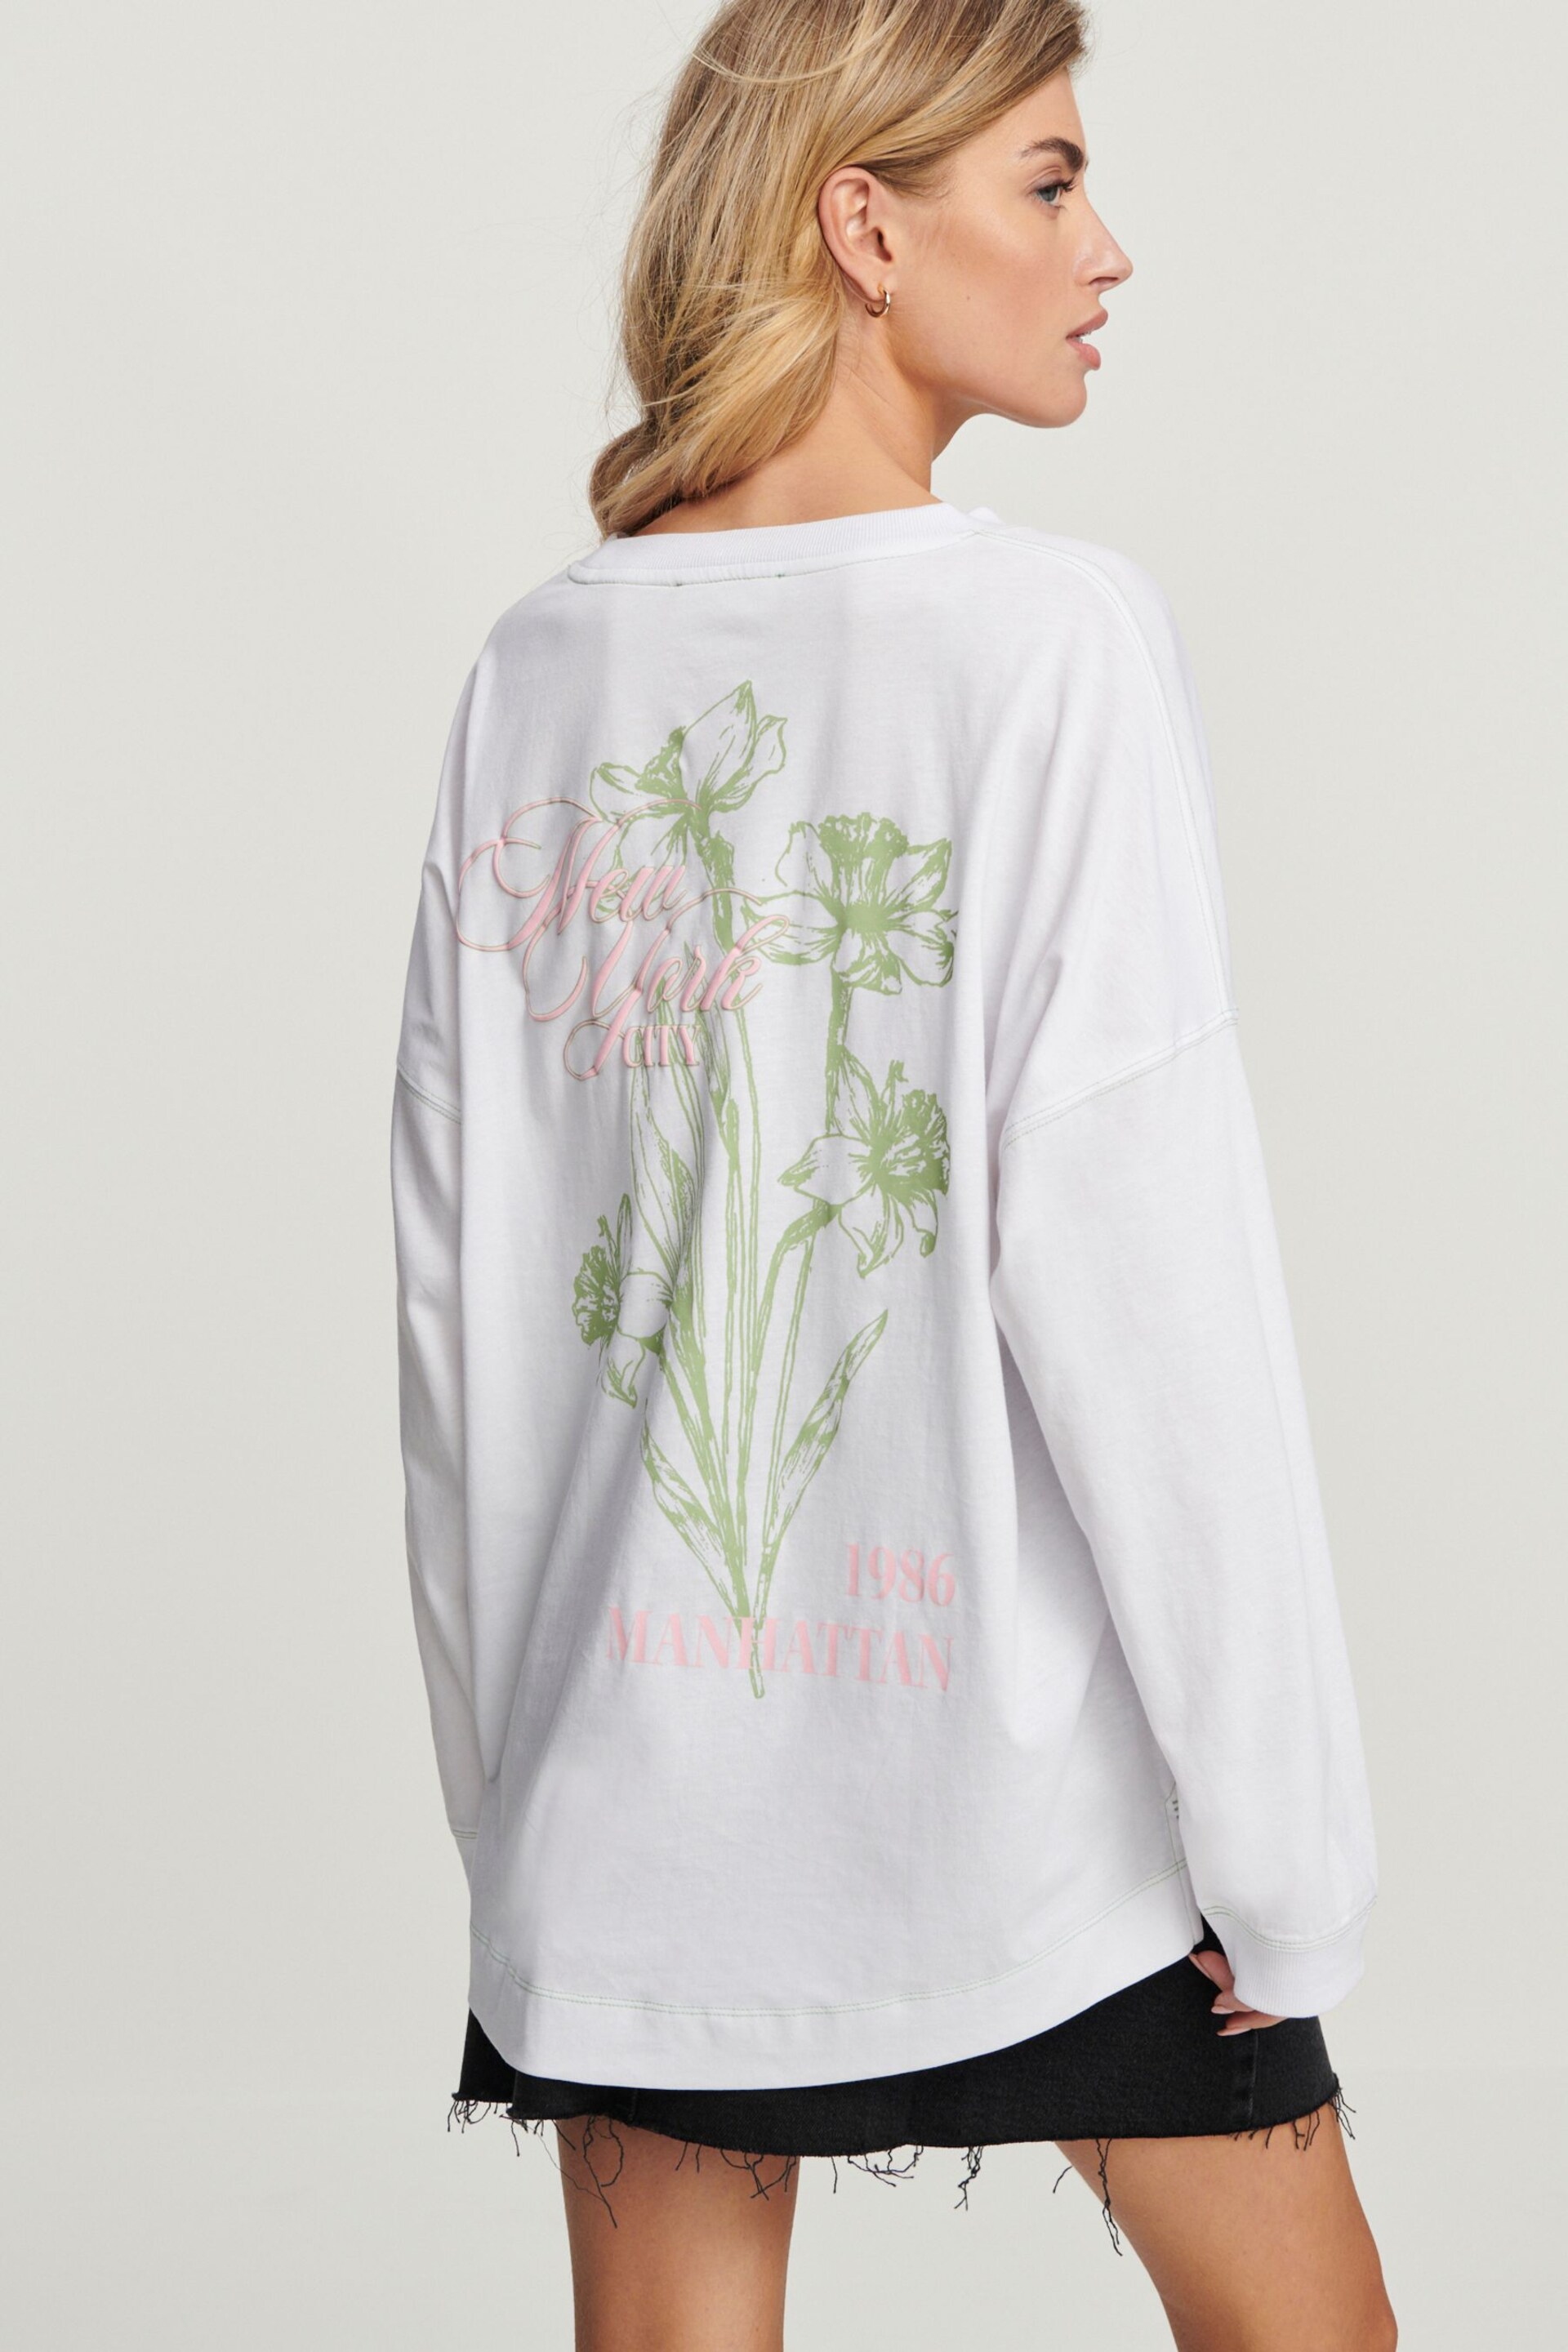 White Long Sleeve Brooklyn New York City Back Graphic Top - Image 1 of 7